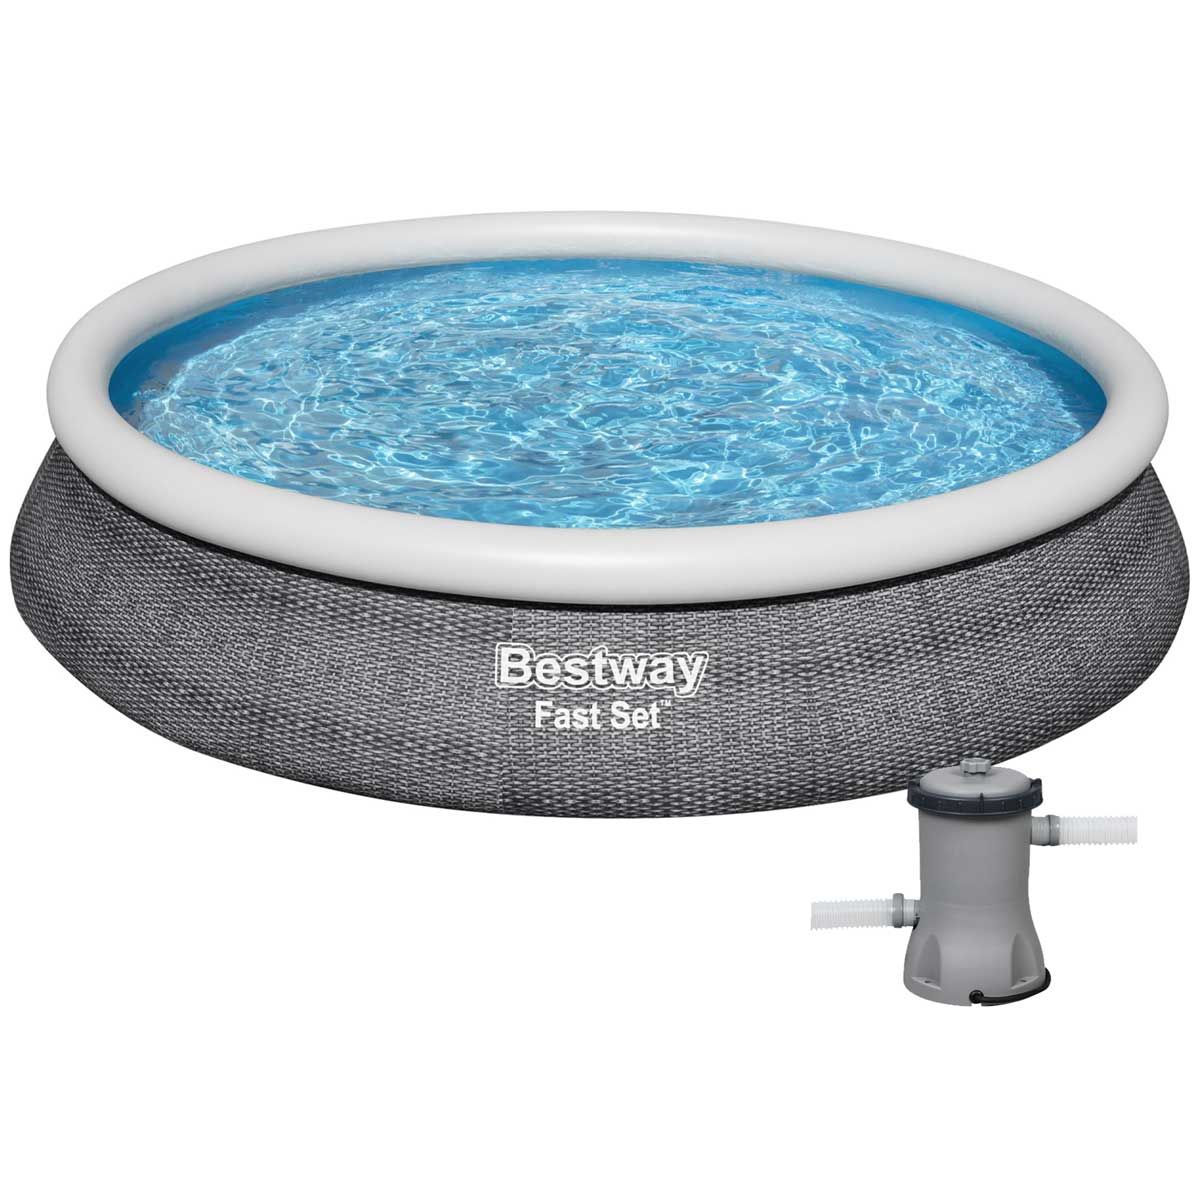 BESTWAY Foldable Self Supporting Round Swimming Pool 12ft x 2ft 6in